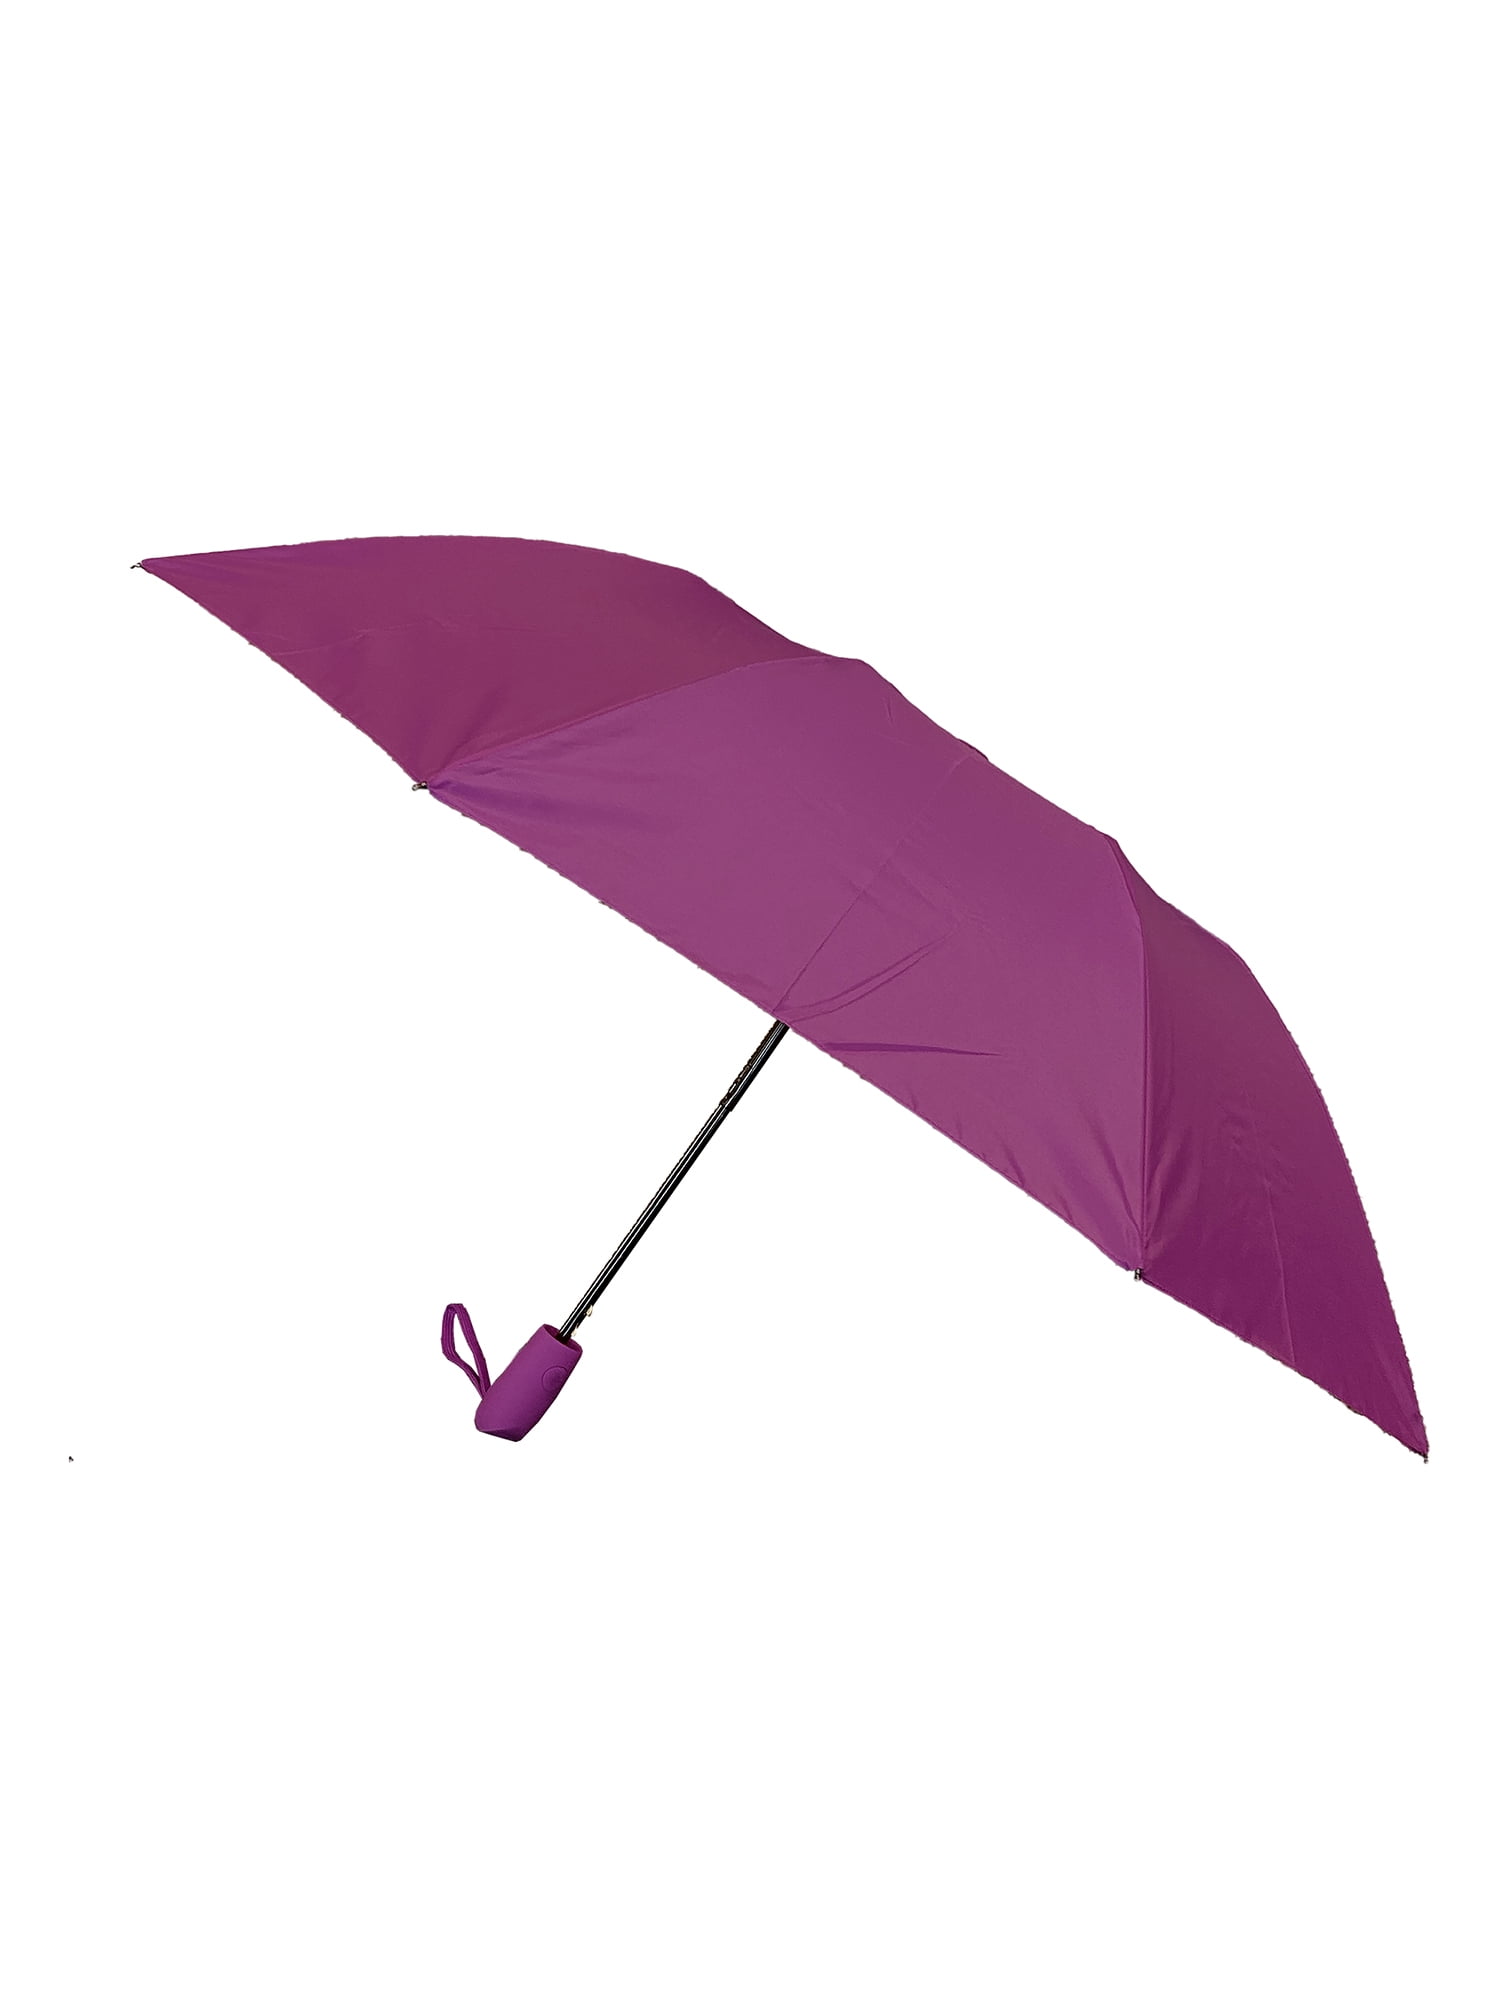 Blue Enterest Mini Portable Umbrella 6.69 inches The Best Intimate Helpmate for You Sun and Rain Umbrella It is Easy to Carry and Ideal for Travel